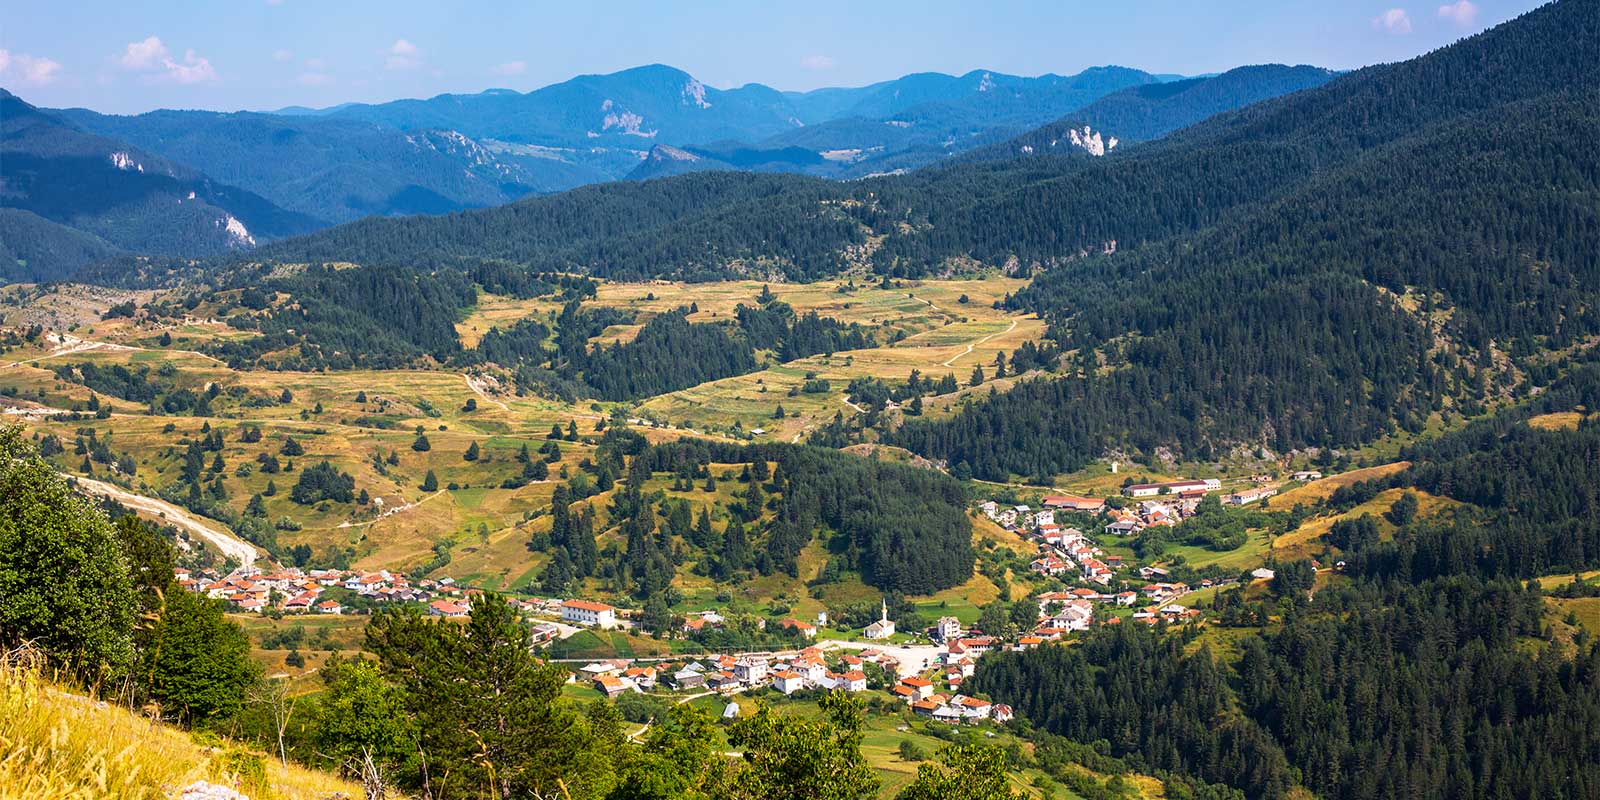 Scenic view of a village in the Rhodope Mountains of Bulgaria